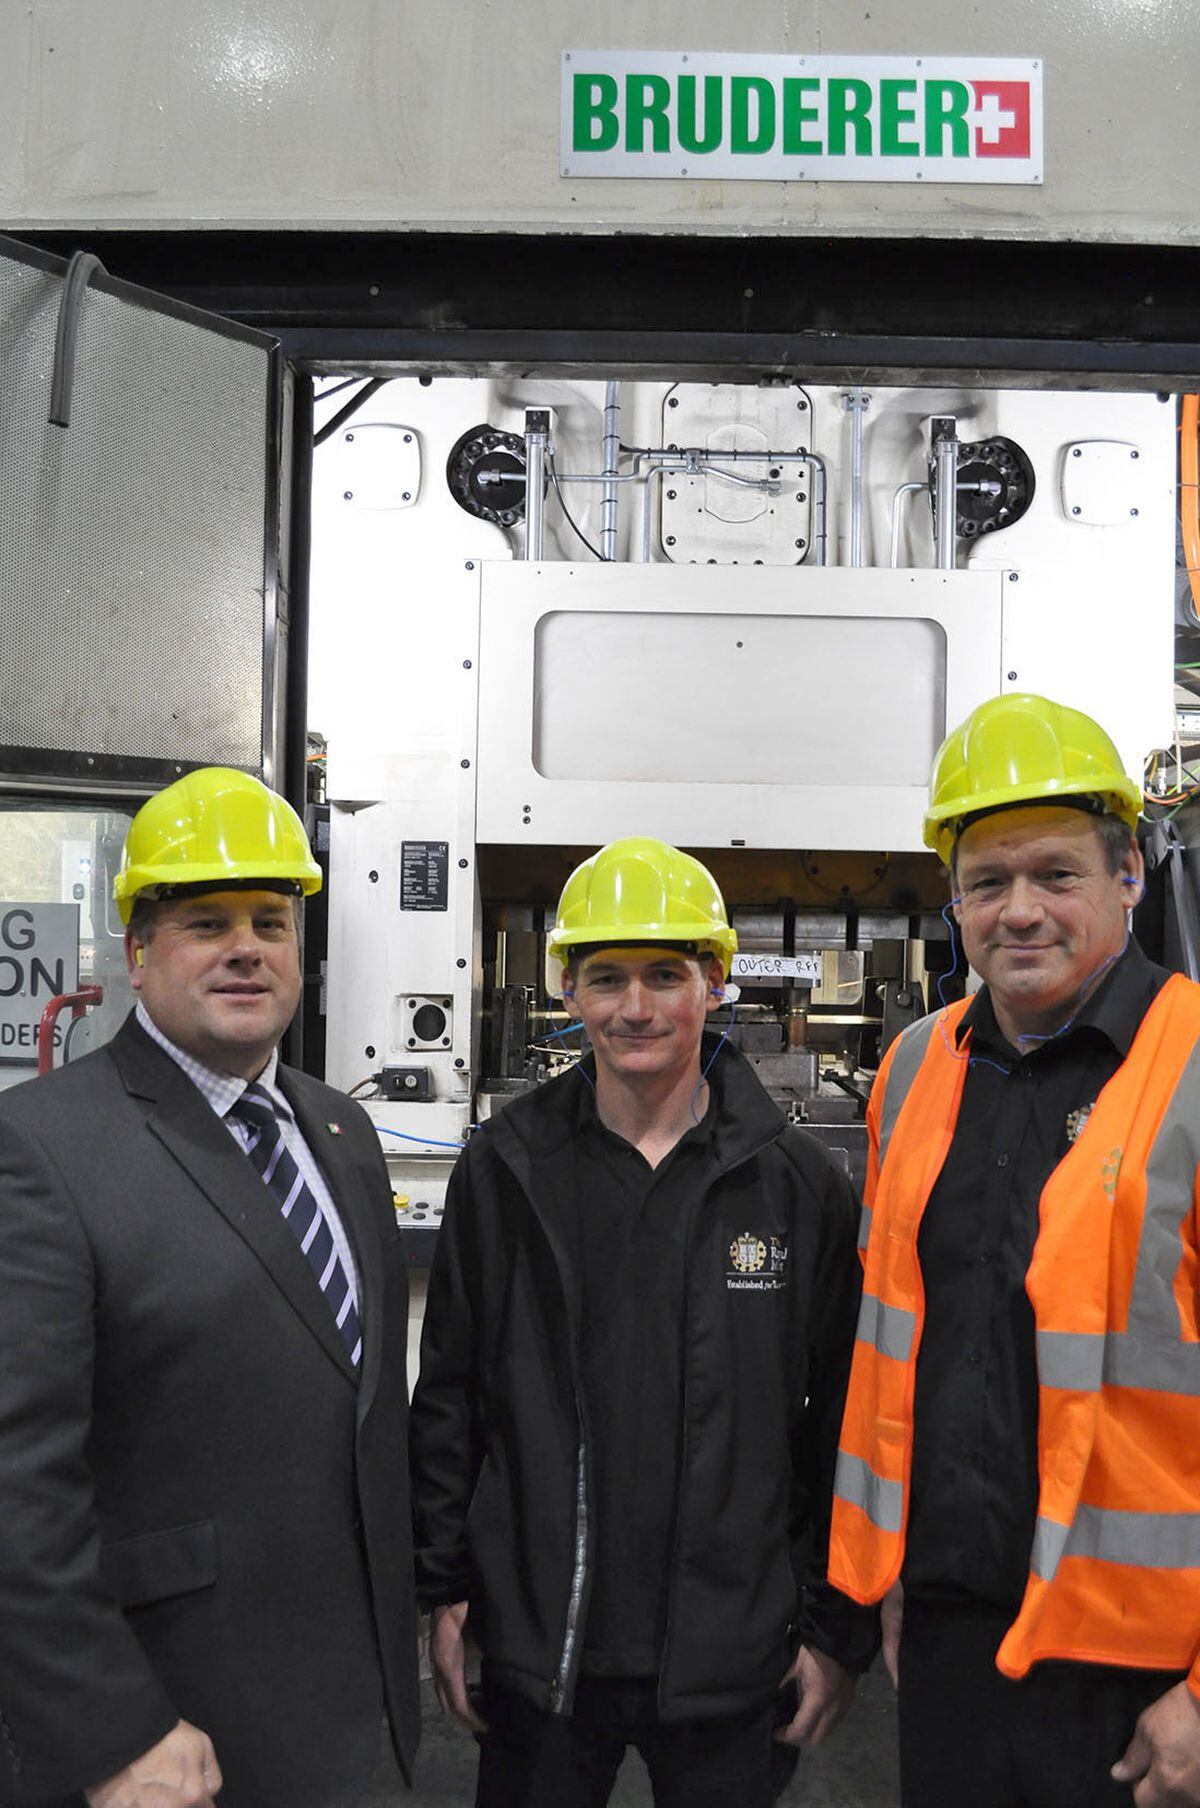 From left: Adrian Haller of Bruderer UK with Mervyn Evans and David McCarthy from the Royal Mint